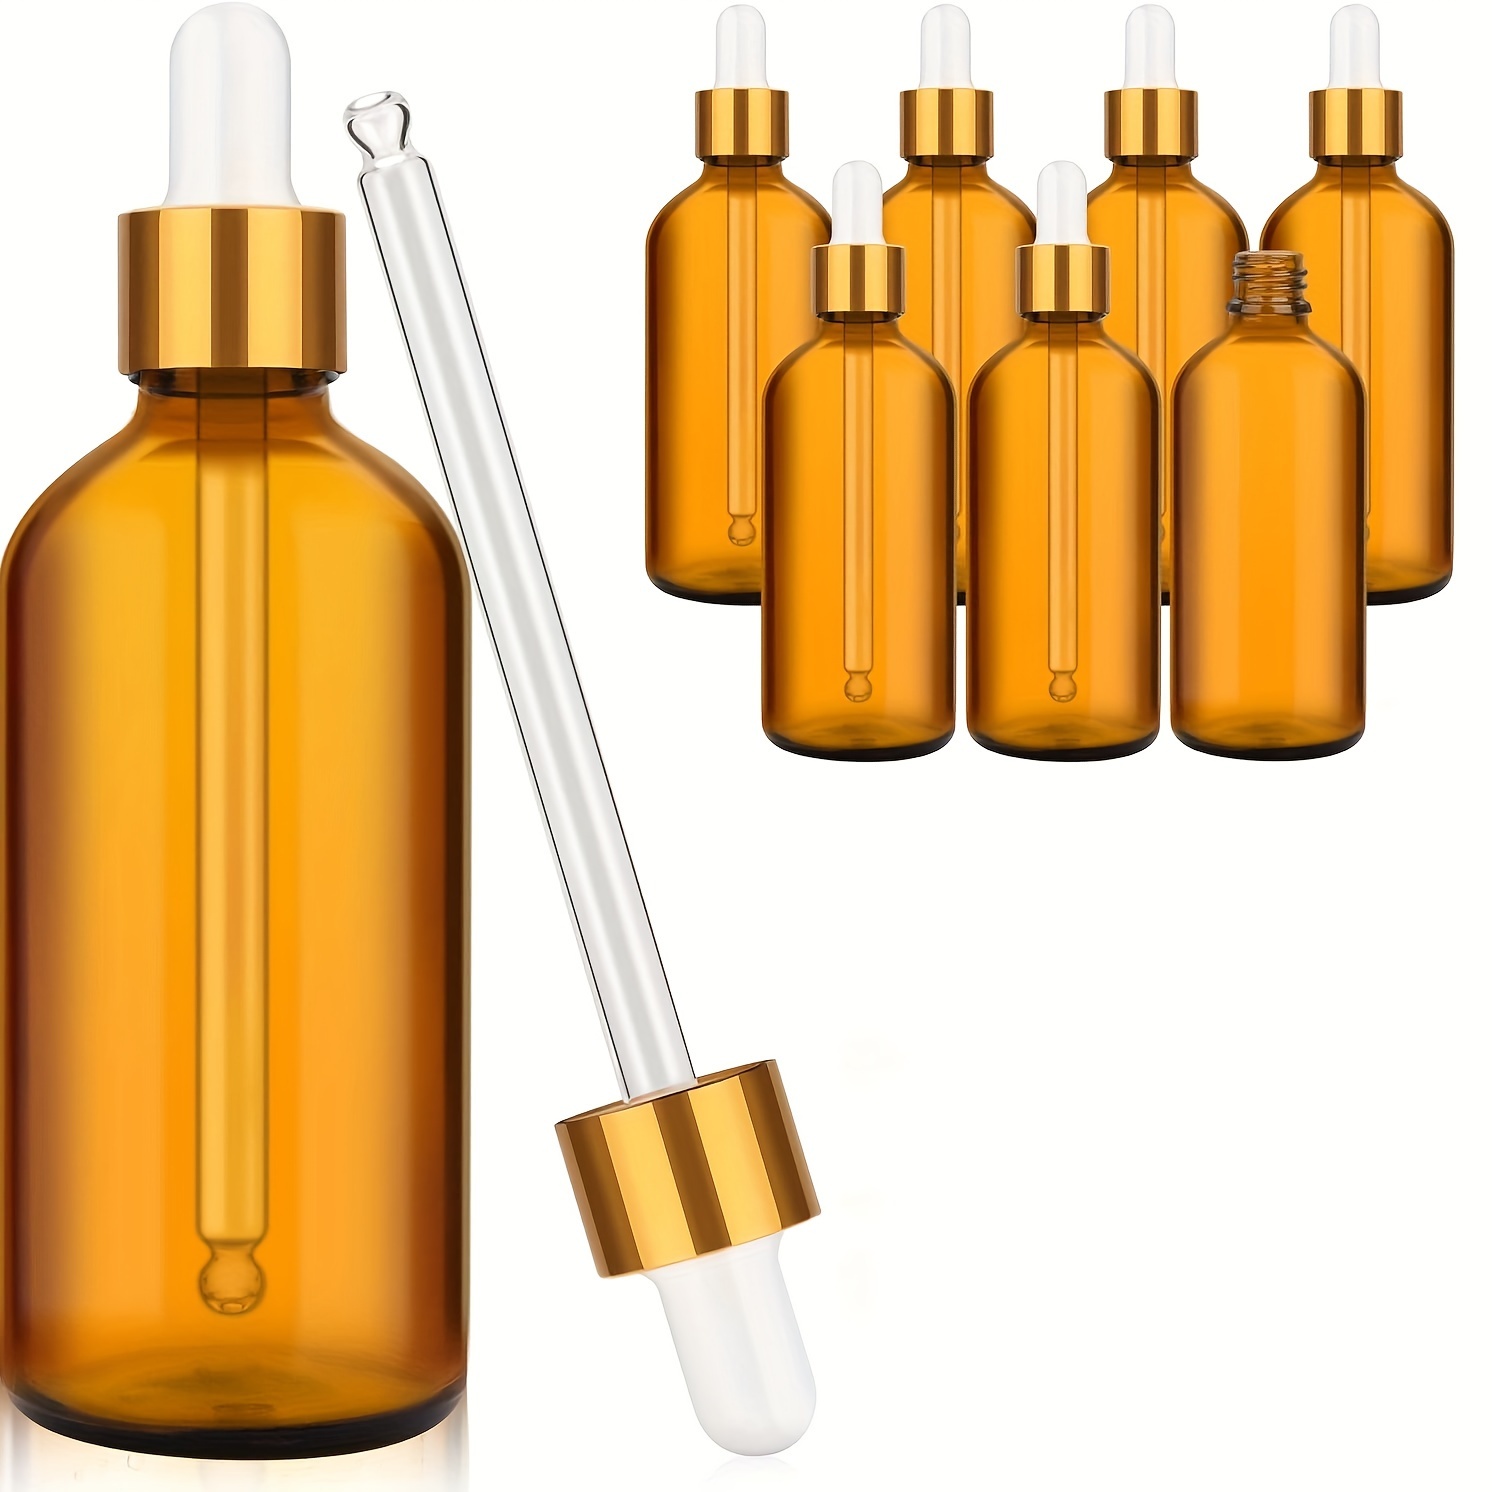 Amber 2oz Dropper Bottle (60ml) Pack of 24 - Glass Tincture Bottles with  Eye Droppers for Essential Oils & More Liquids - Leakproof Travel Bottles